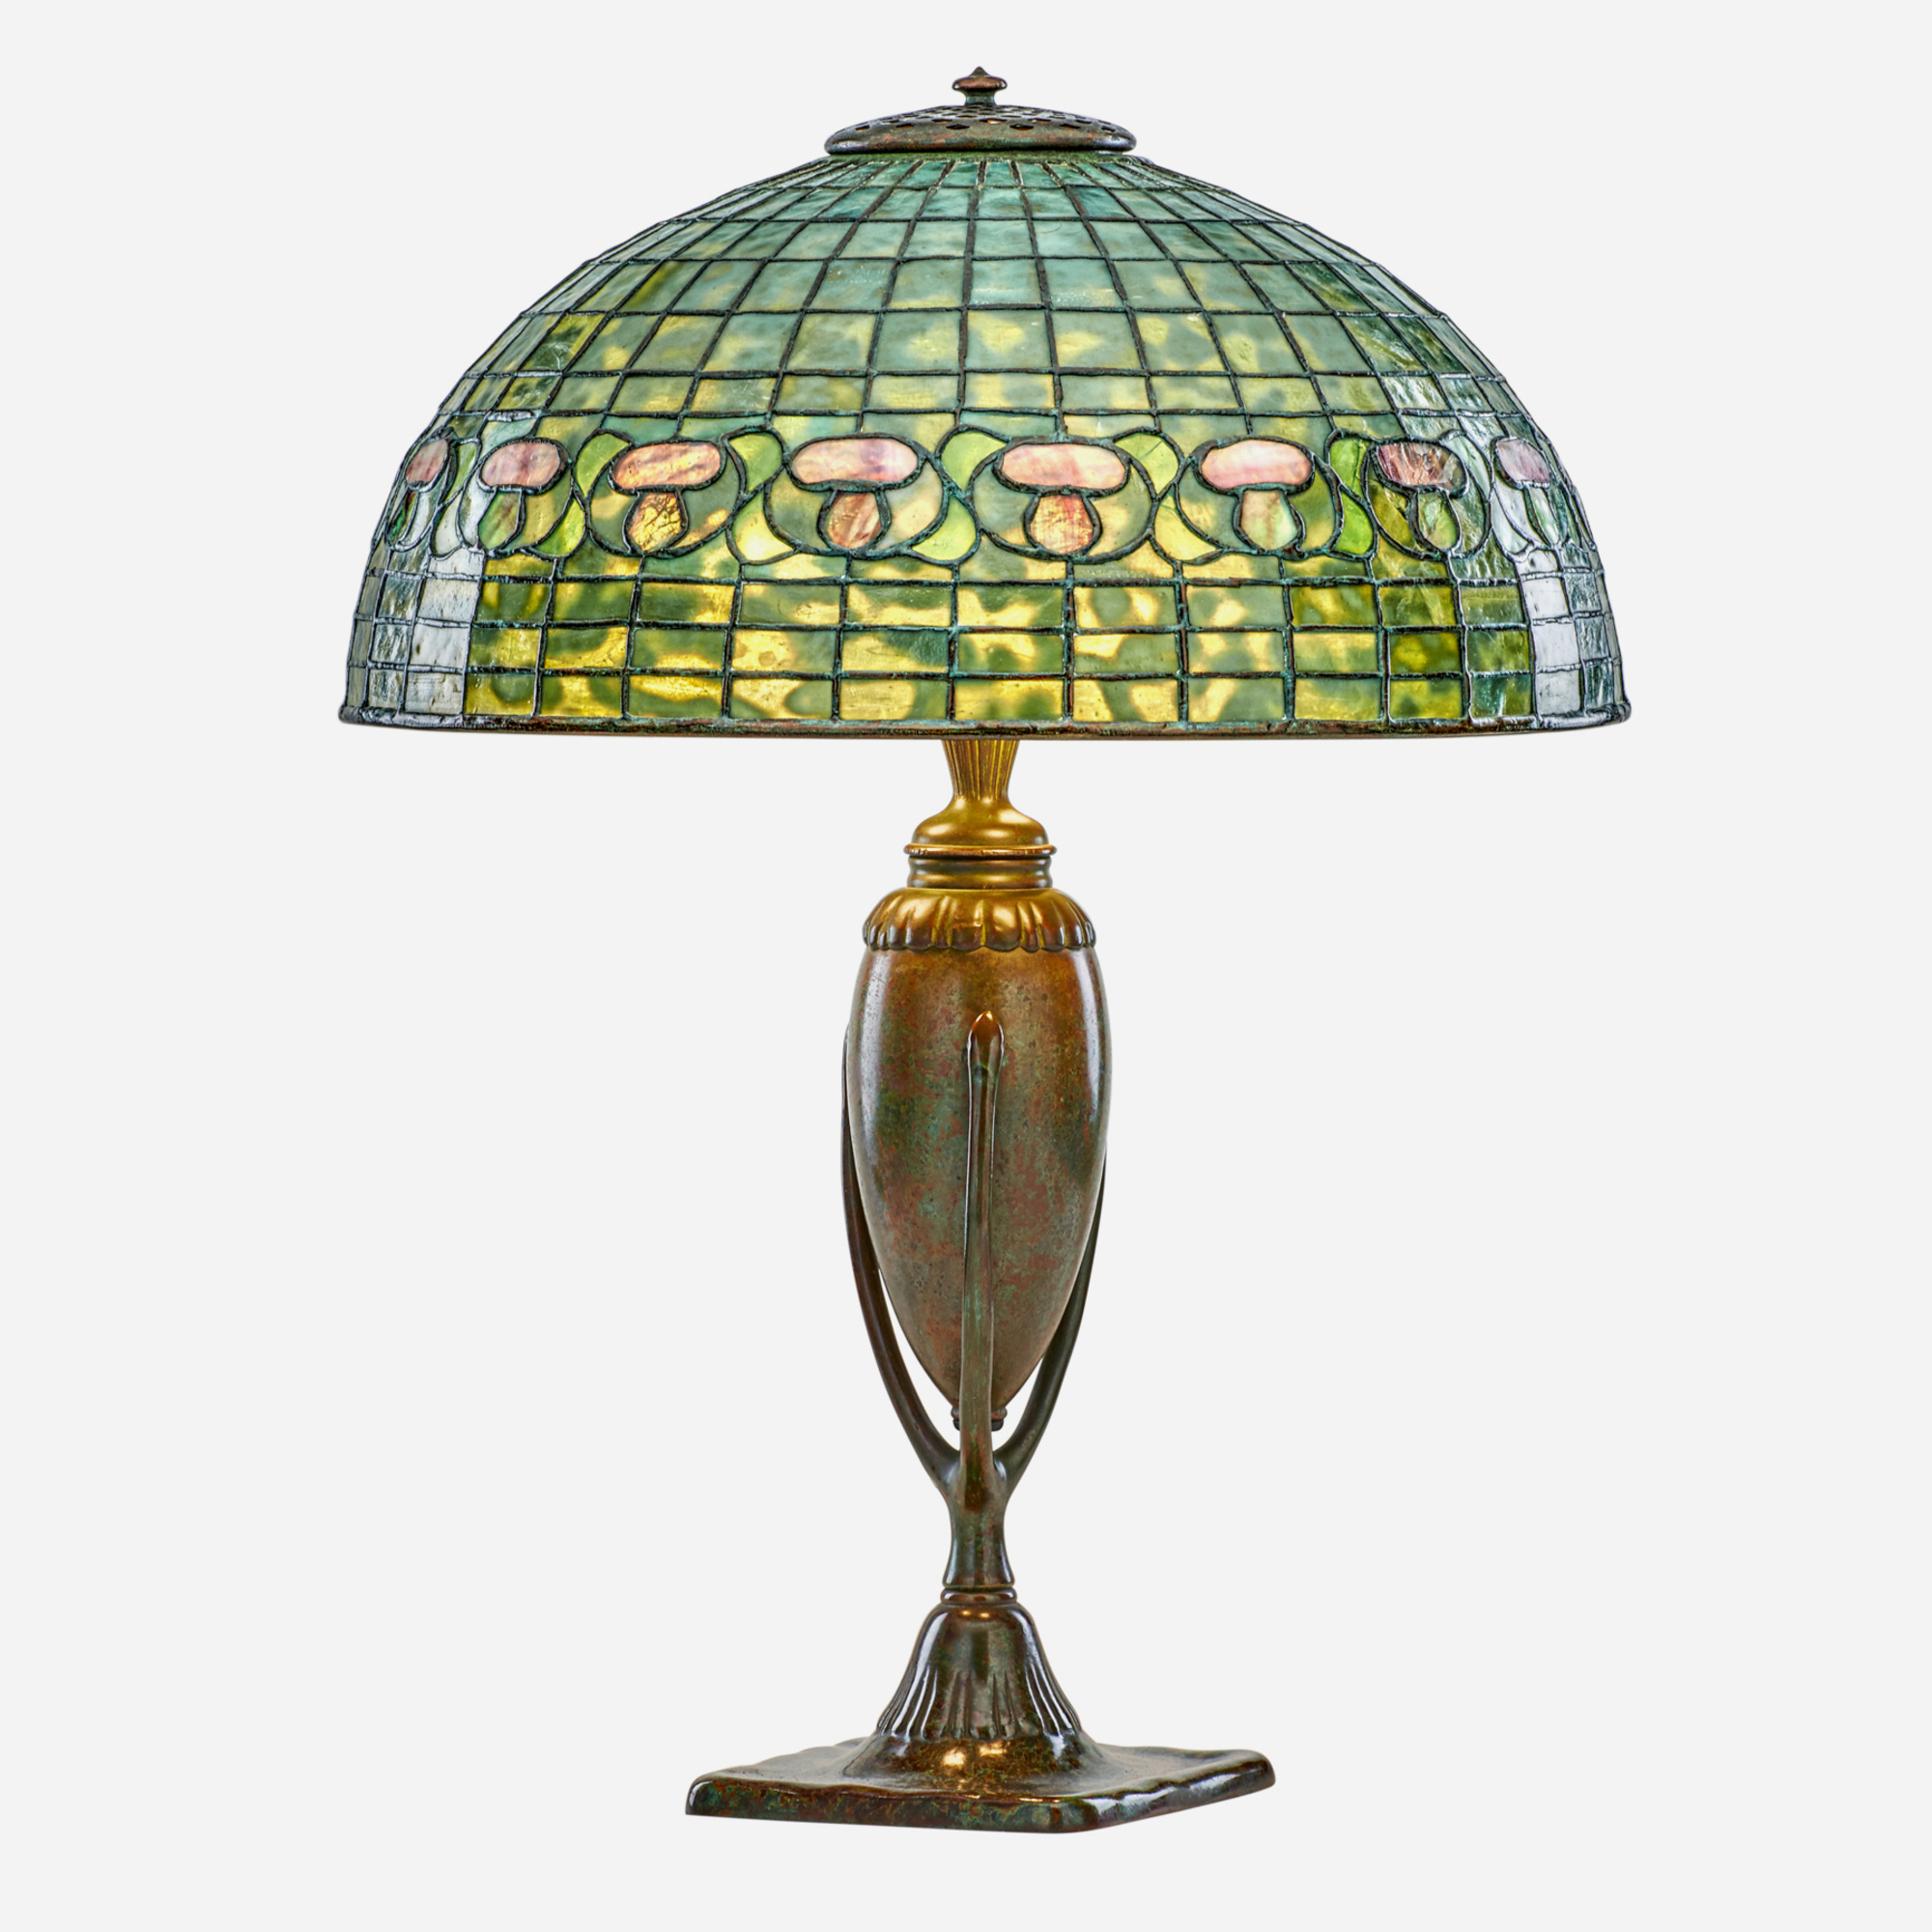 Sold at Auction: Louis Comfort Tiffany, DRAWING FOR A GLASS LAMP SHADE BY  LOUIS C TIFFANY